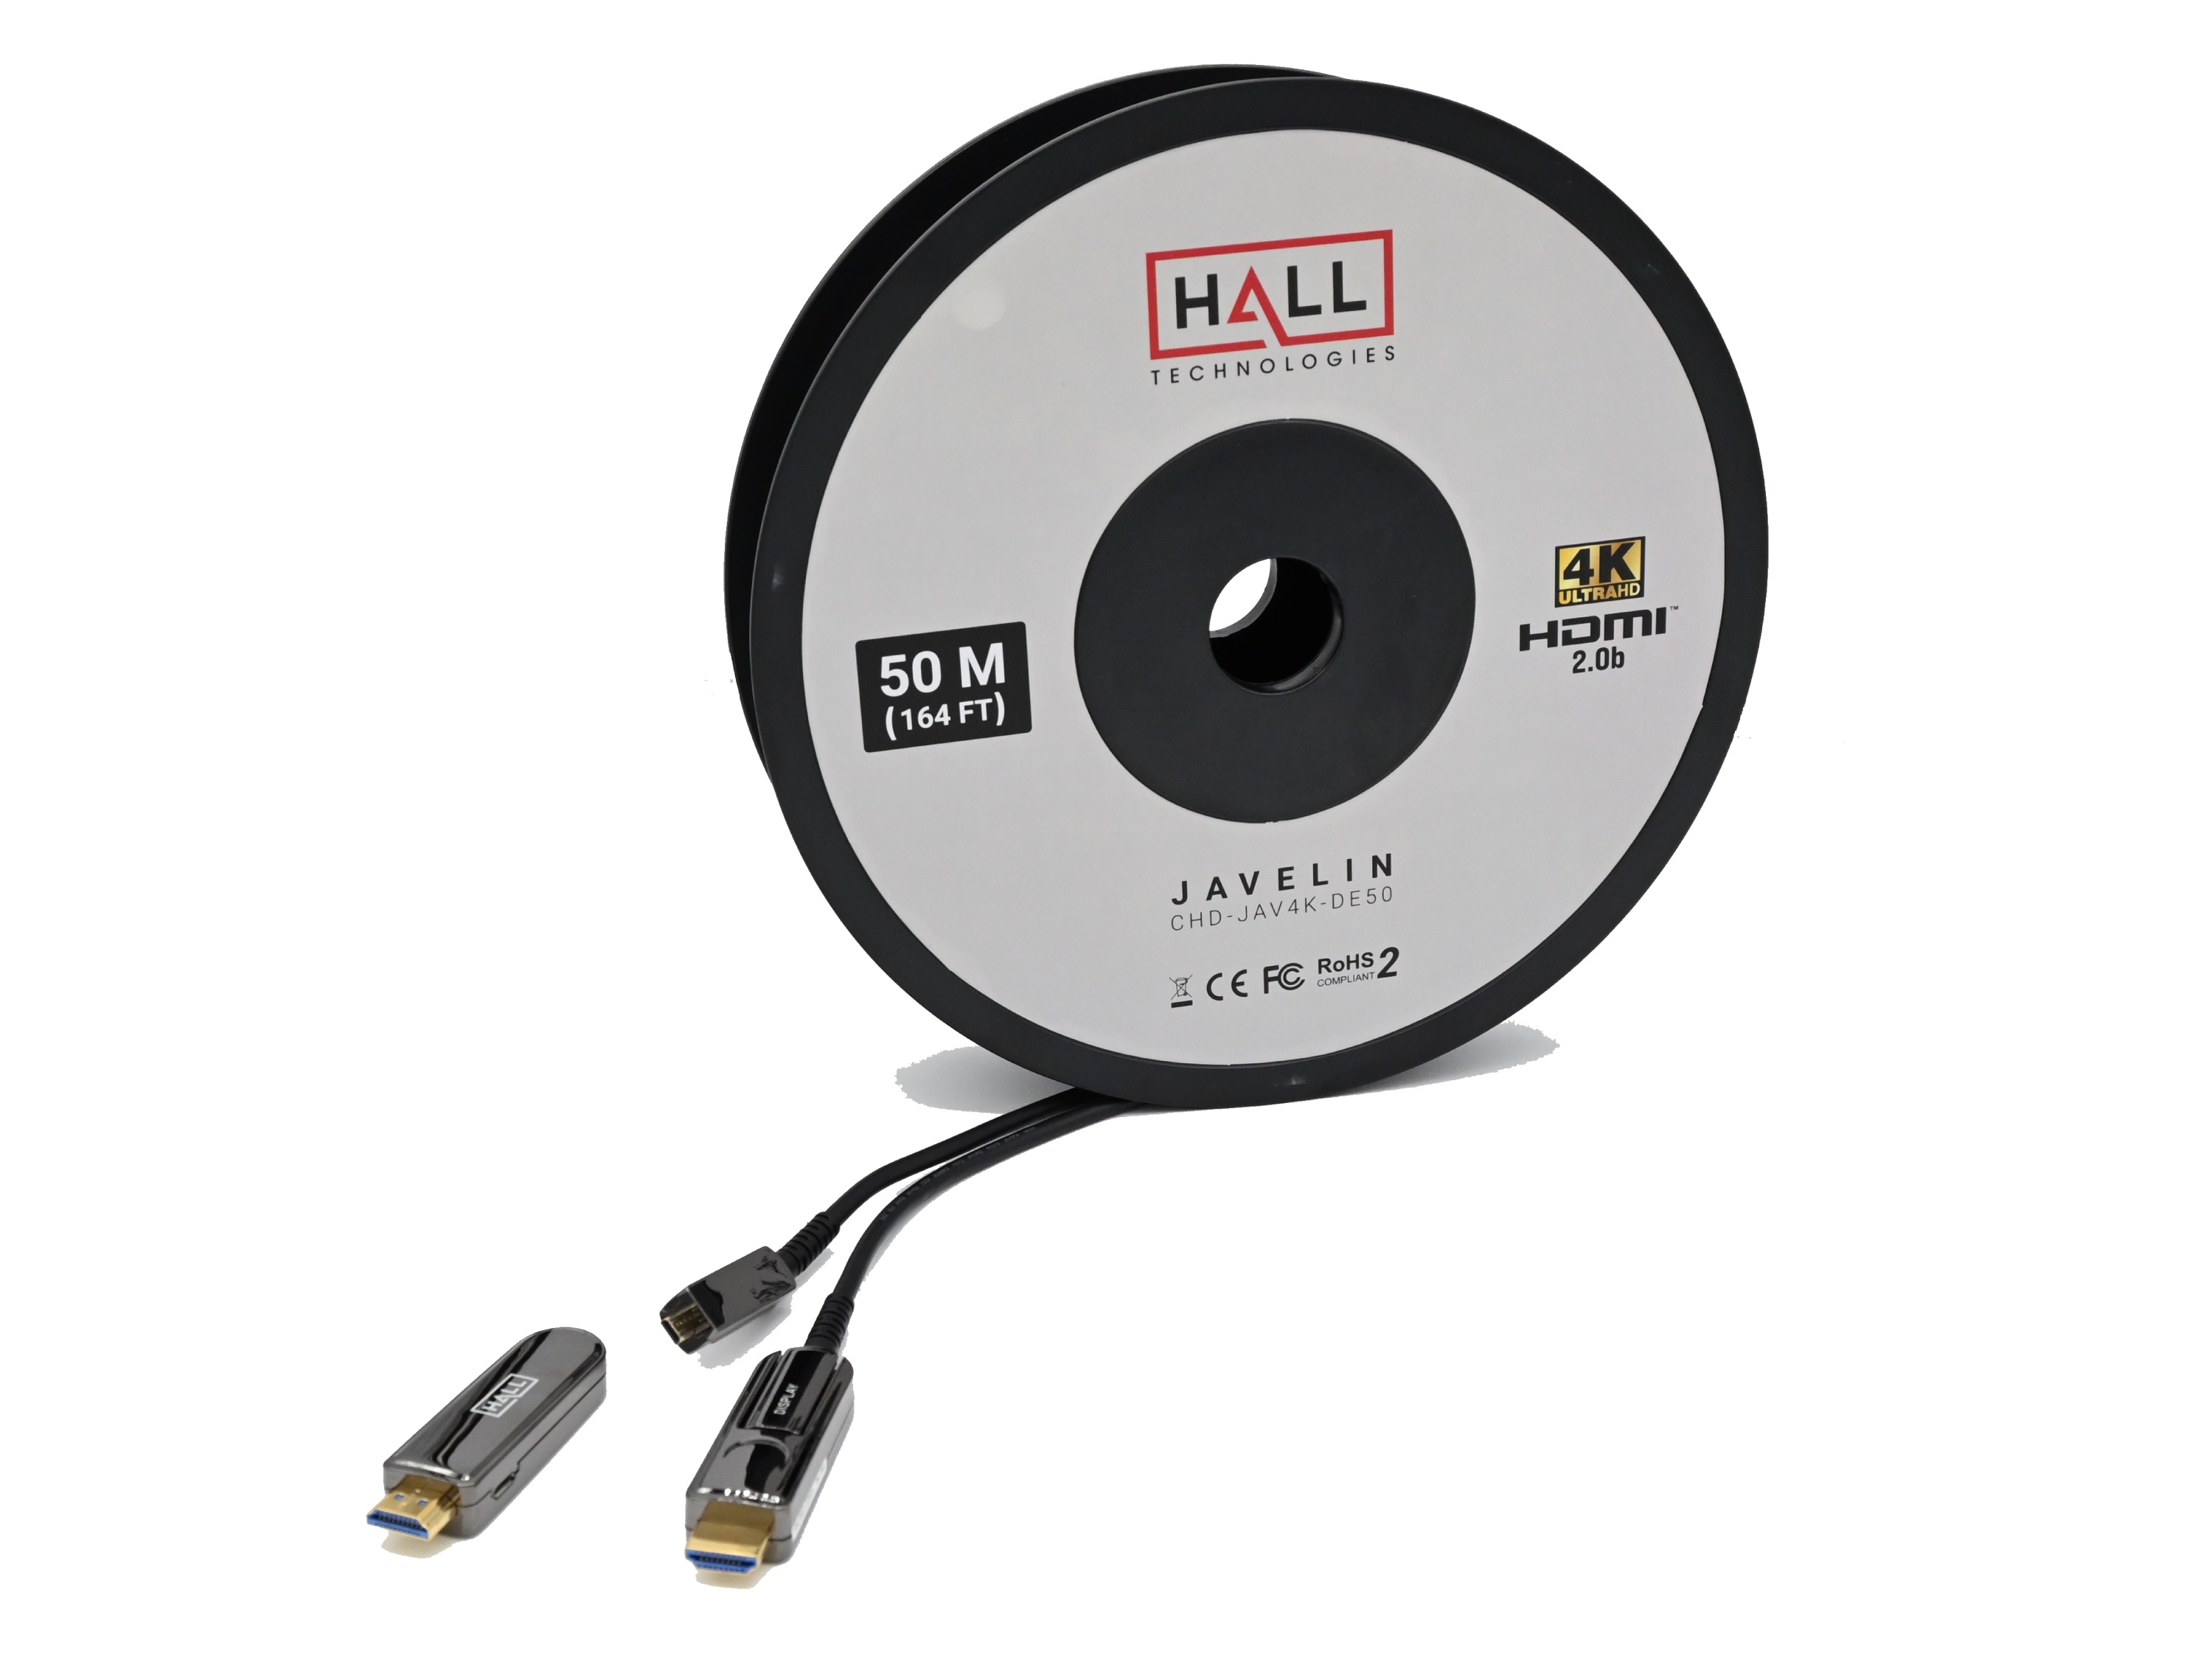 CHD-JAV4K-DE75 75m/200ft 18 Gbps 4K Javelin Active Plenum HDMI Cable with Detachable Ends by Hall Technologies